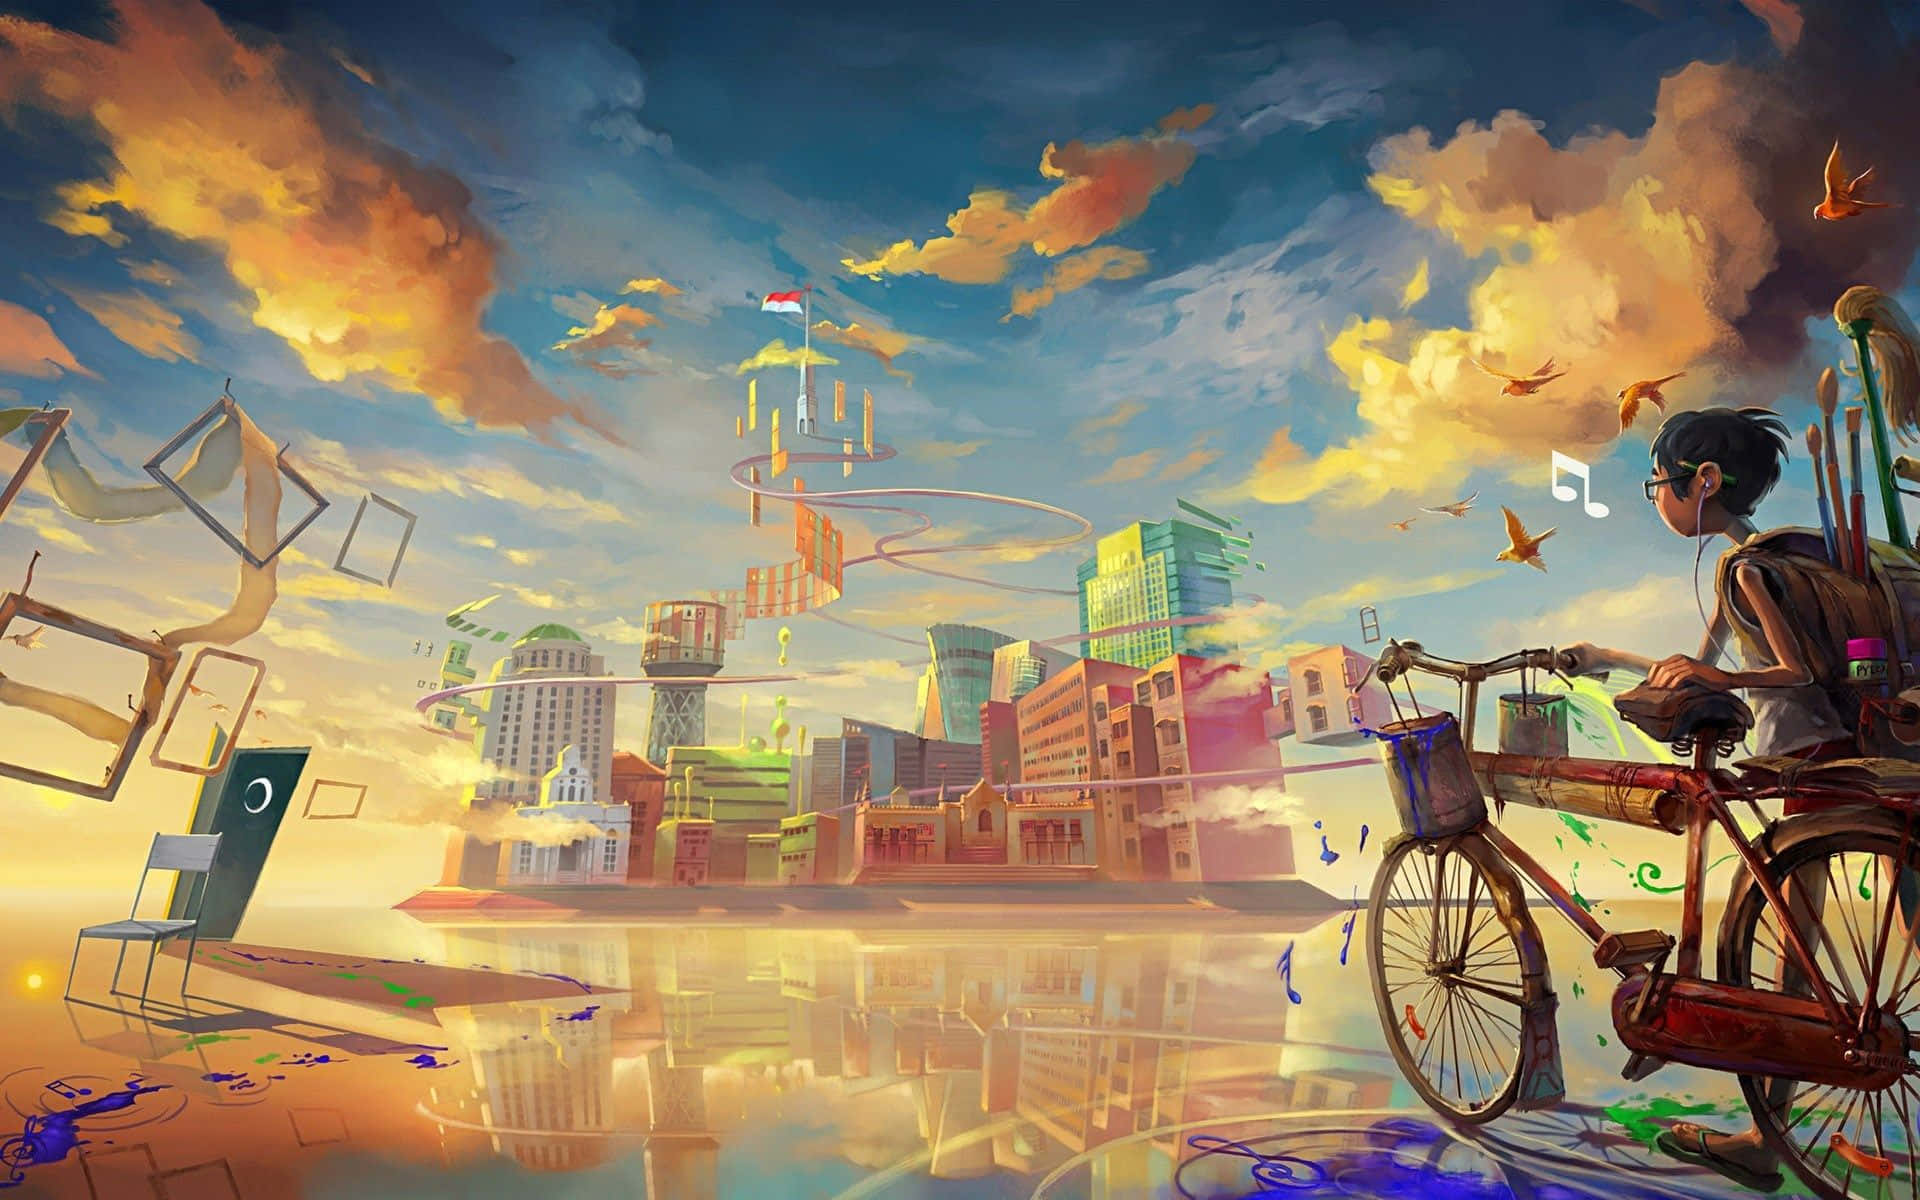 A Man On A Bicycle In Front Of A City